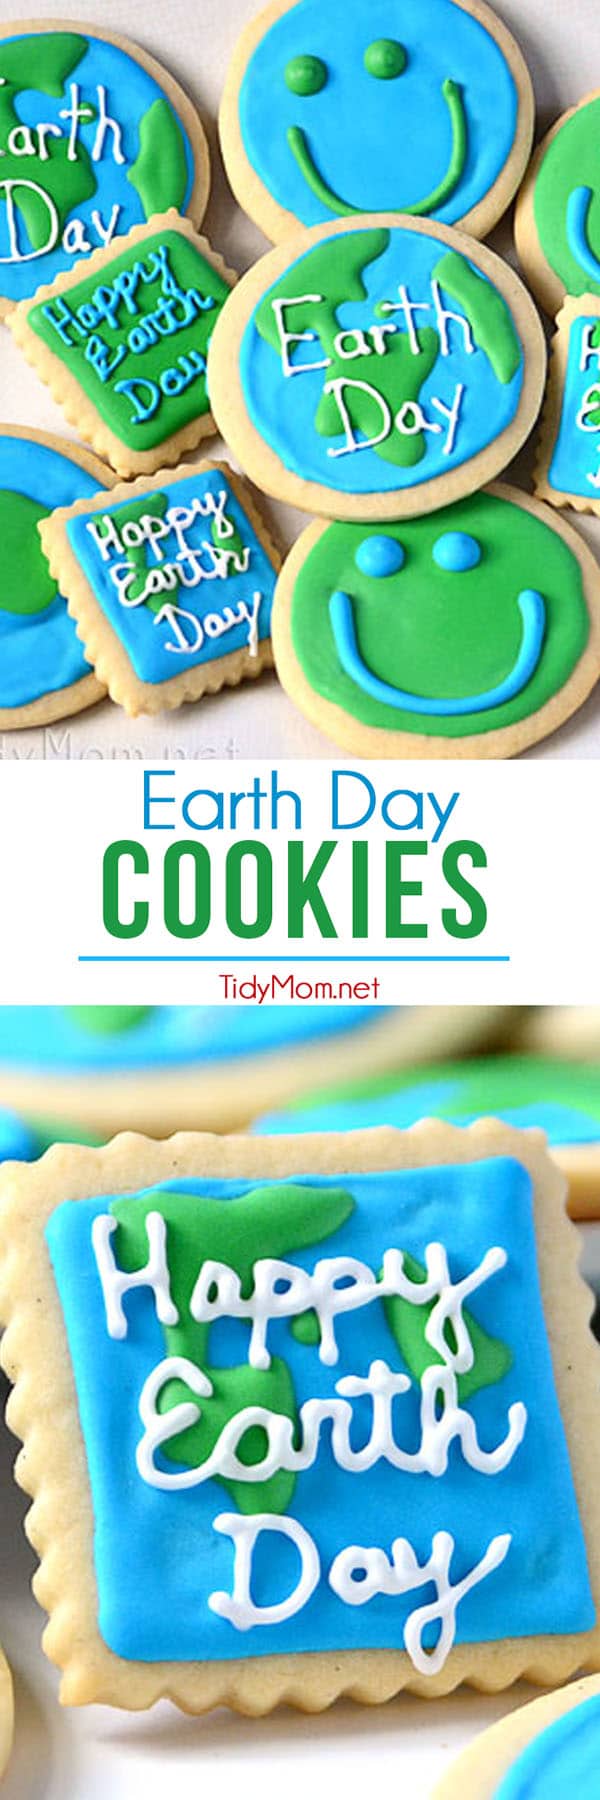 Earth Day Cookies at TidyMom.net